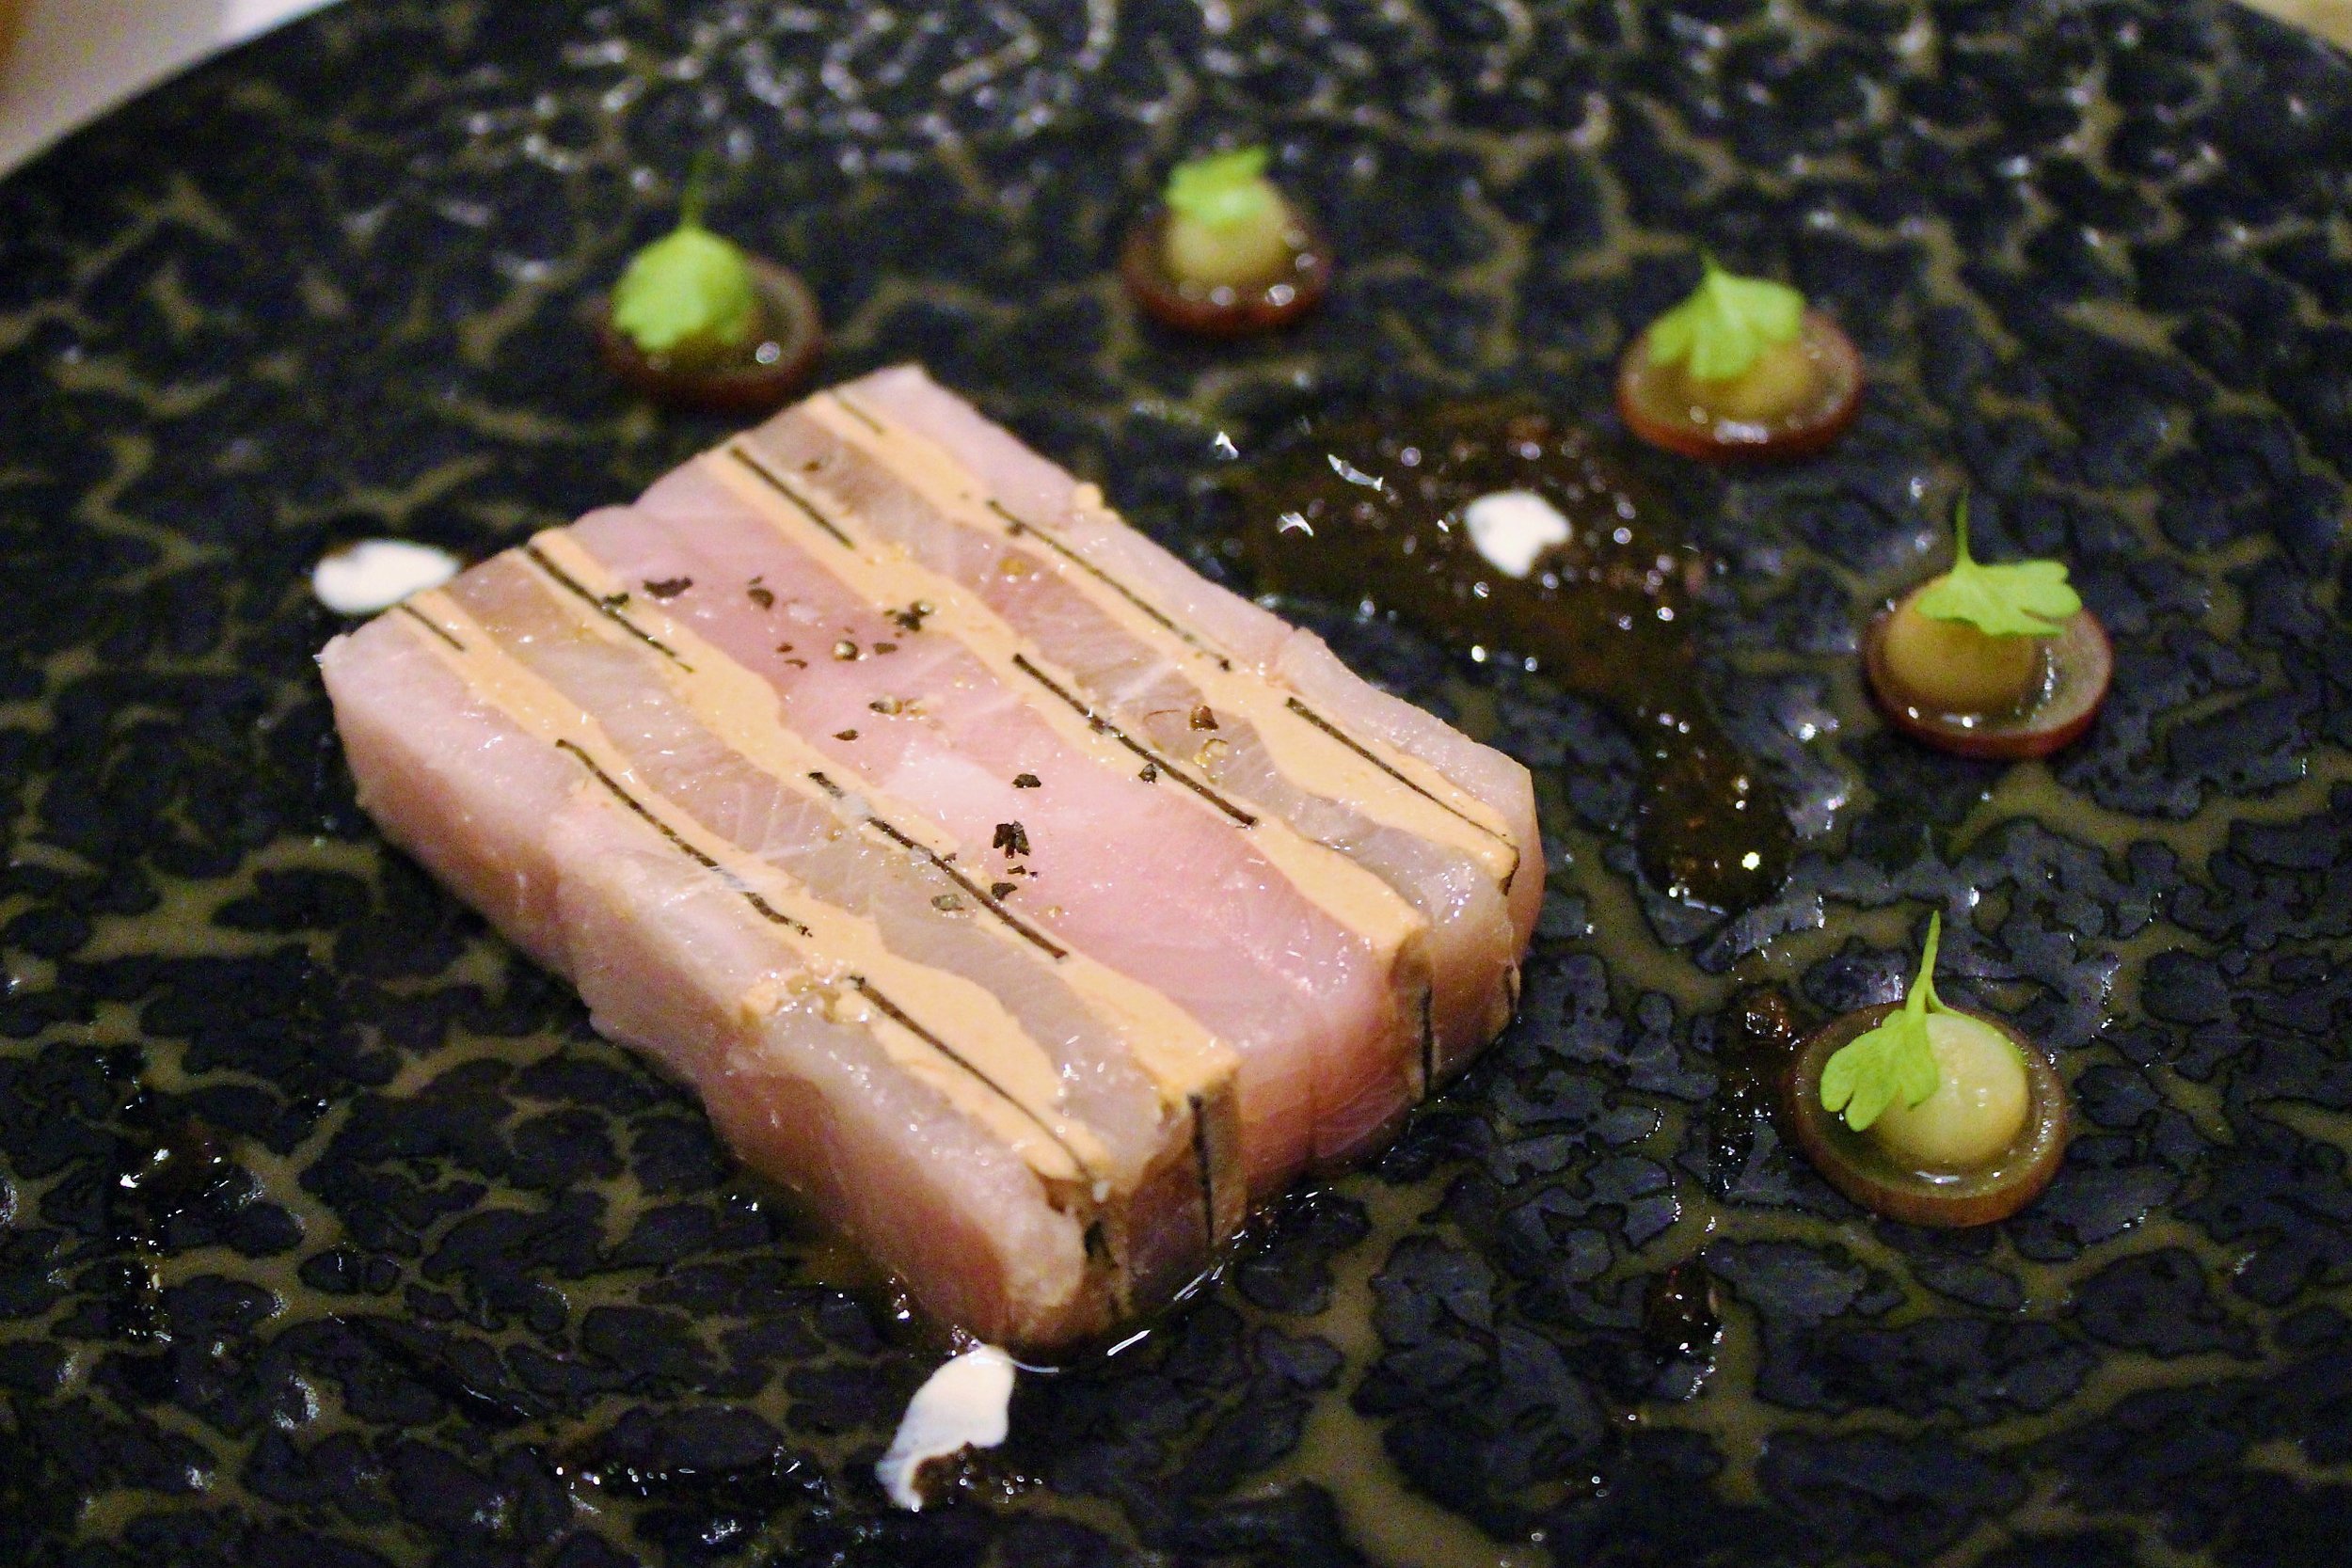 Hamachi, Black Truffle, and Foie Gras Mille-Feuille at Gabriel Kreuther in New York City